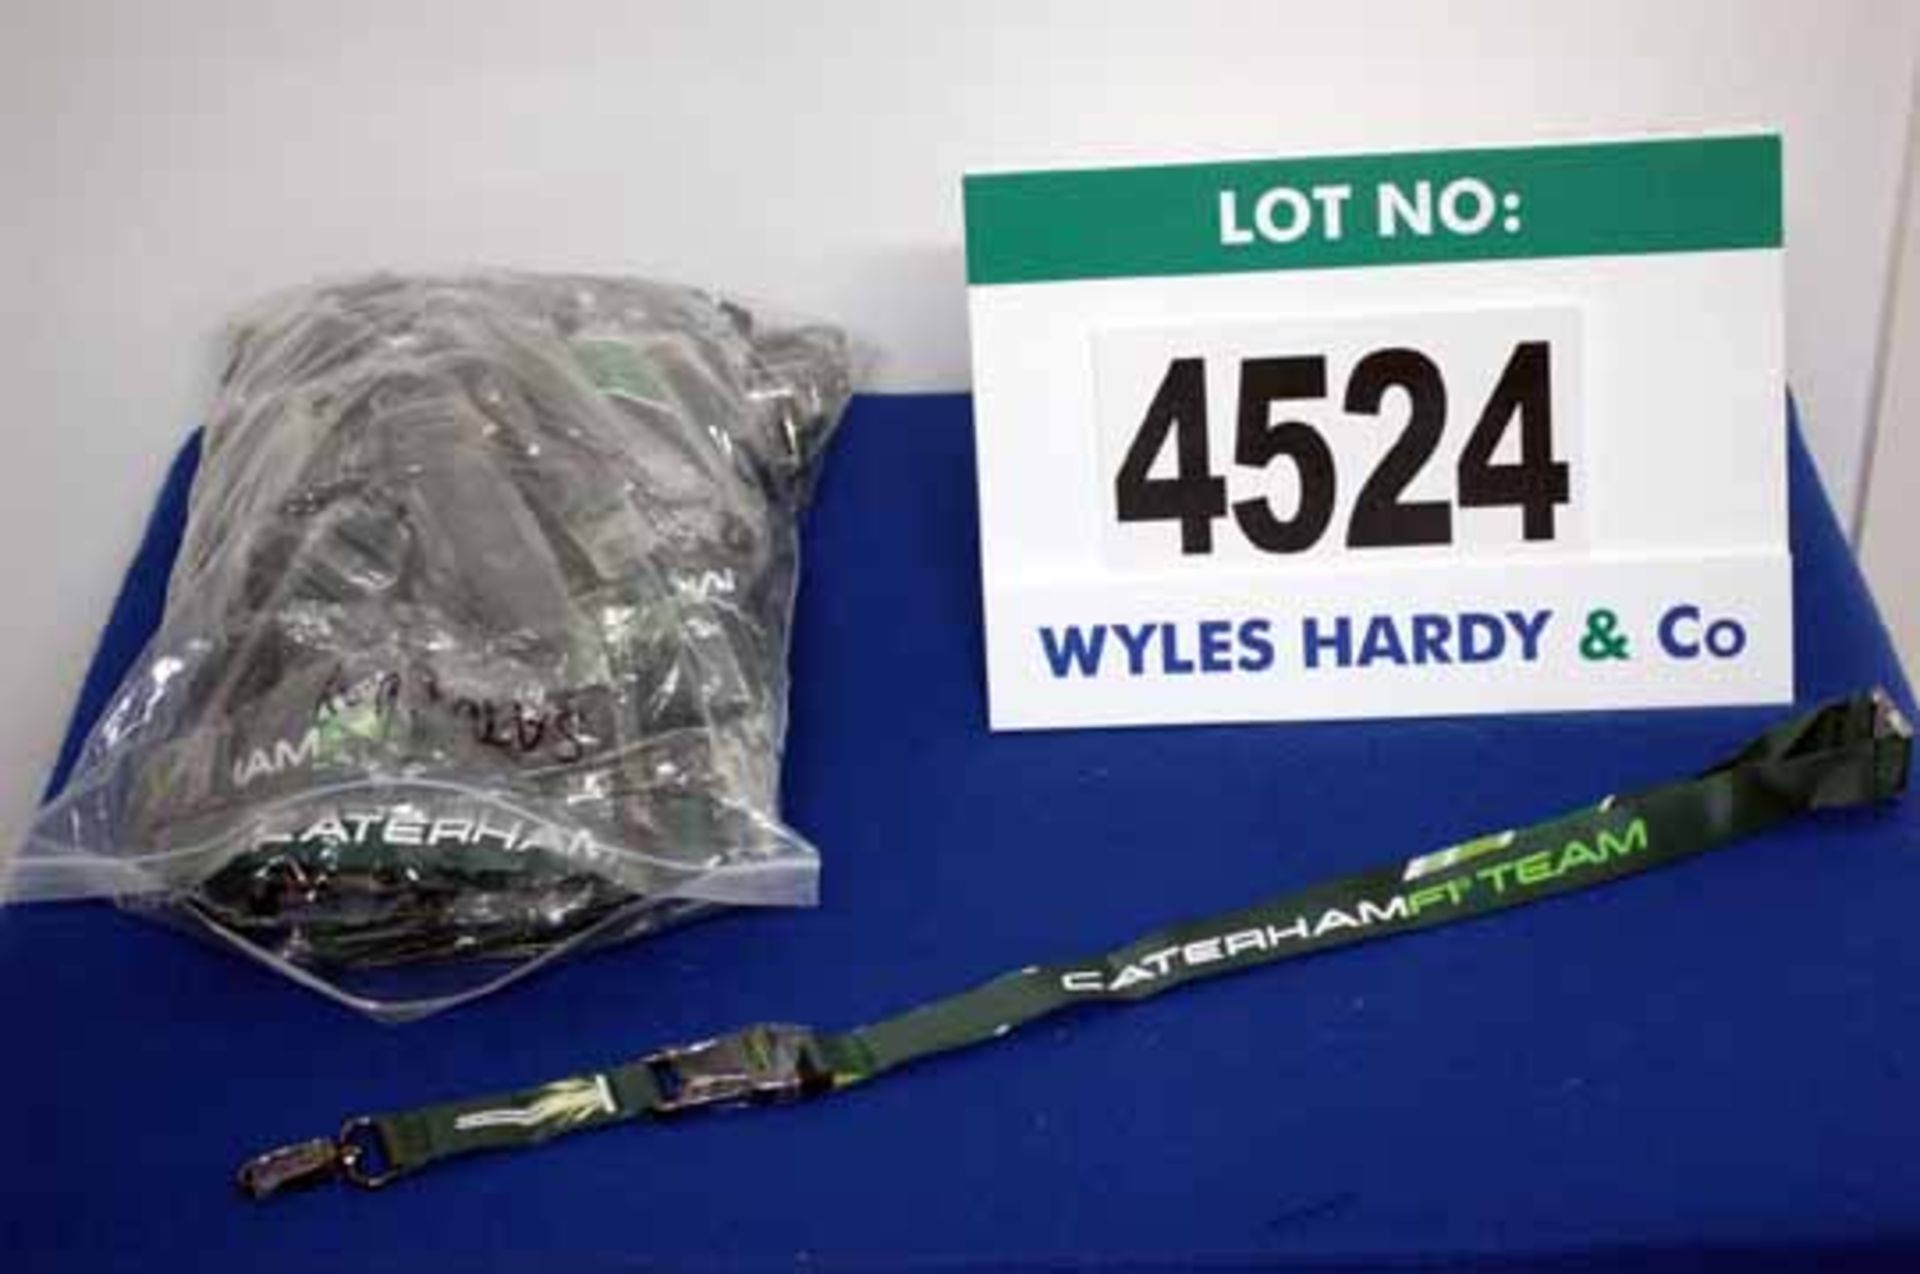 A Quantity (Approx. Eighty) CATERHAM F1 Lanyards (Want it Shipped? http://bit.ly/1wIhCEv)